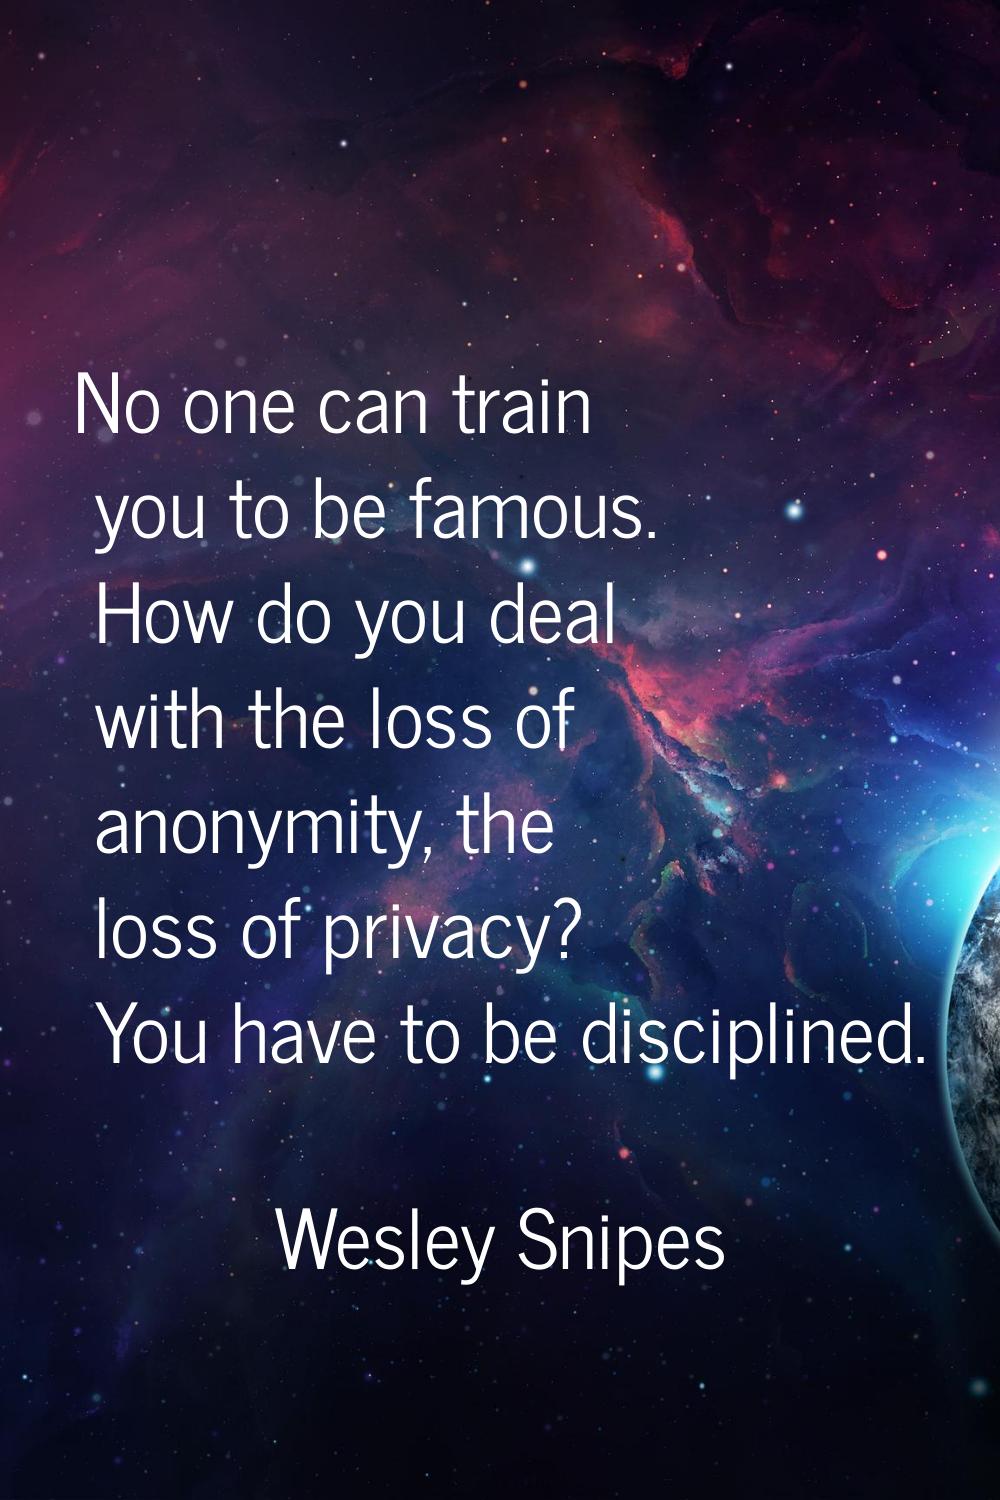 No one can train you to be famous. How do you deal with the loss of anonymity, the loss of privacy?